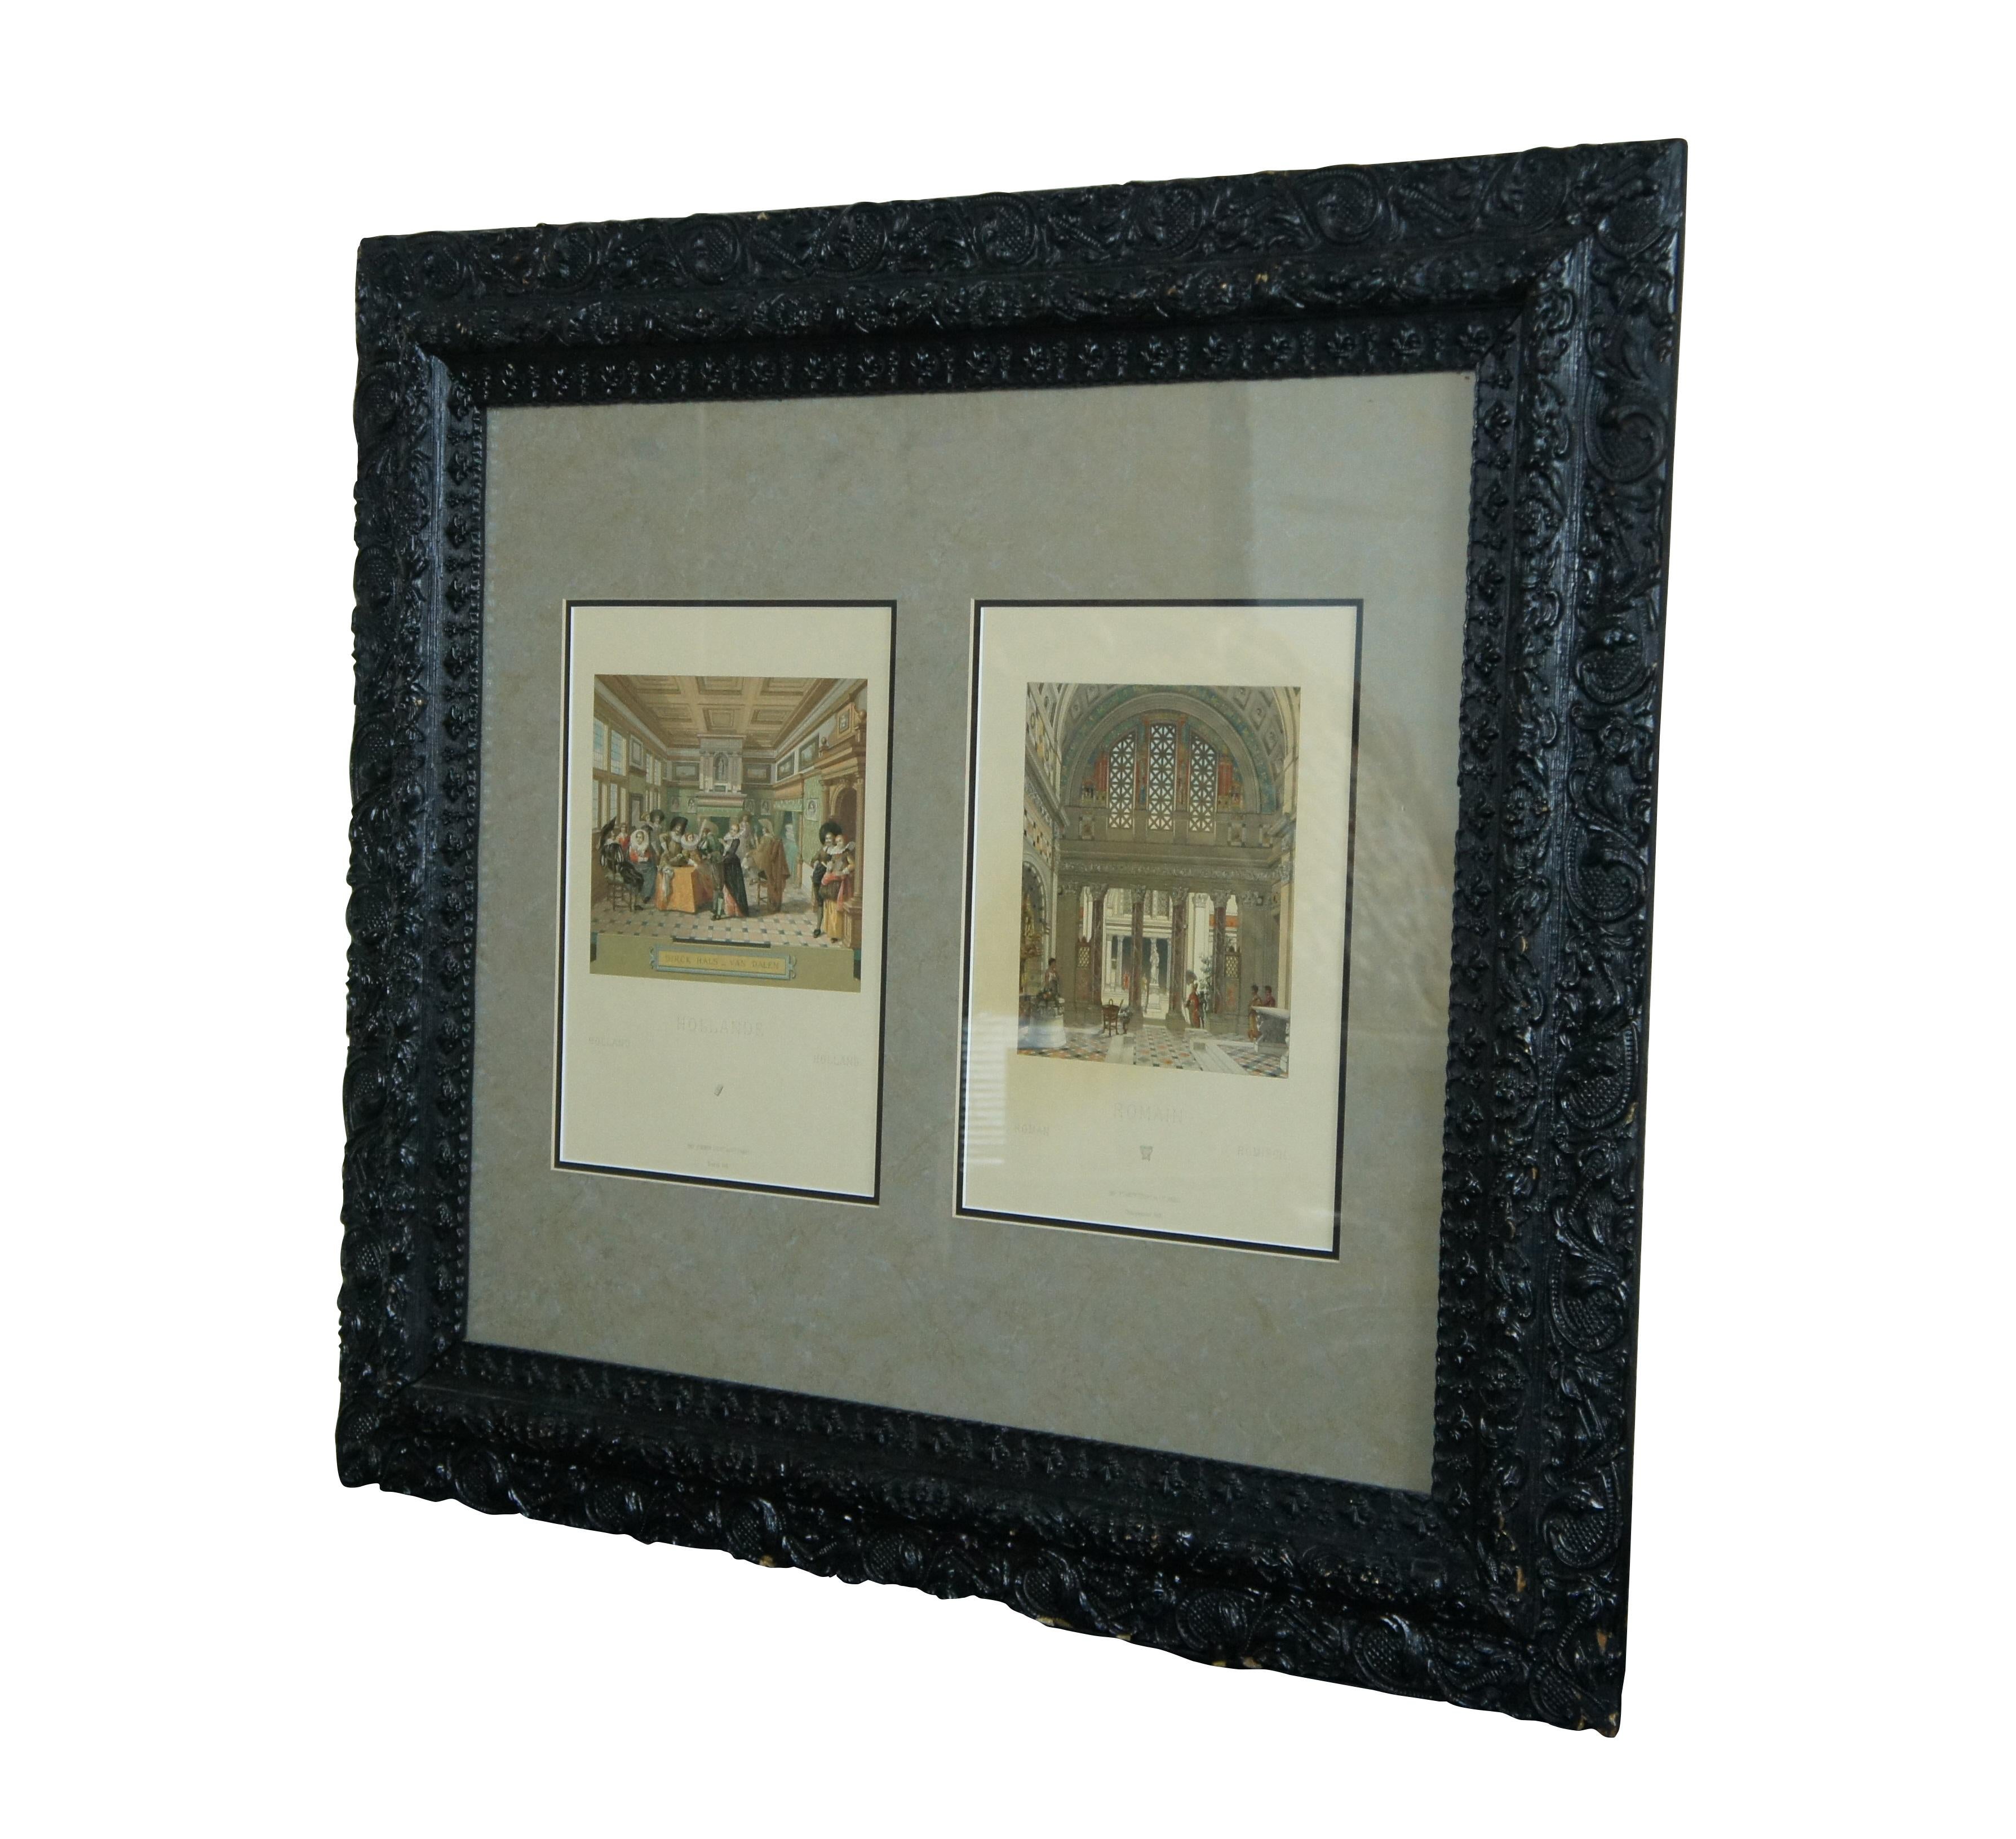 Antique 1880s French colored architectural lithograph prints framed as a diptych, showing a pair of elegant interiors - Hollande (Holland - lithographed by Durin) and Romain (Roman - lithographed by Charpentier). Both Imposed by Firmin Didot et Cie,